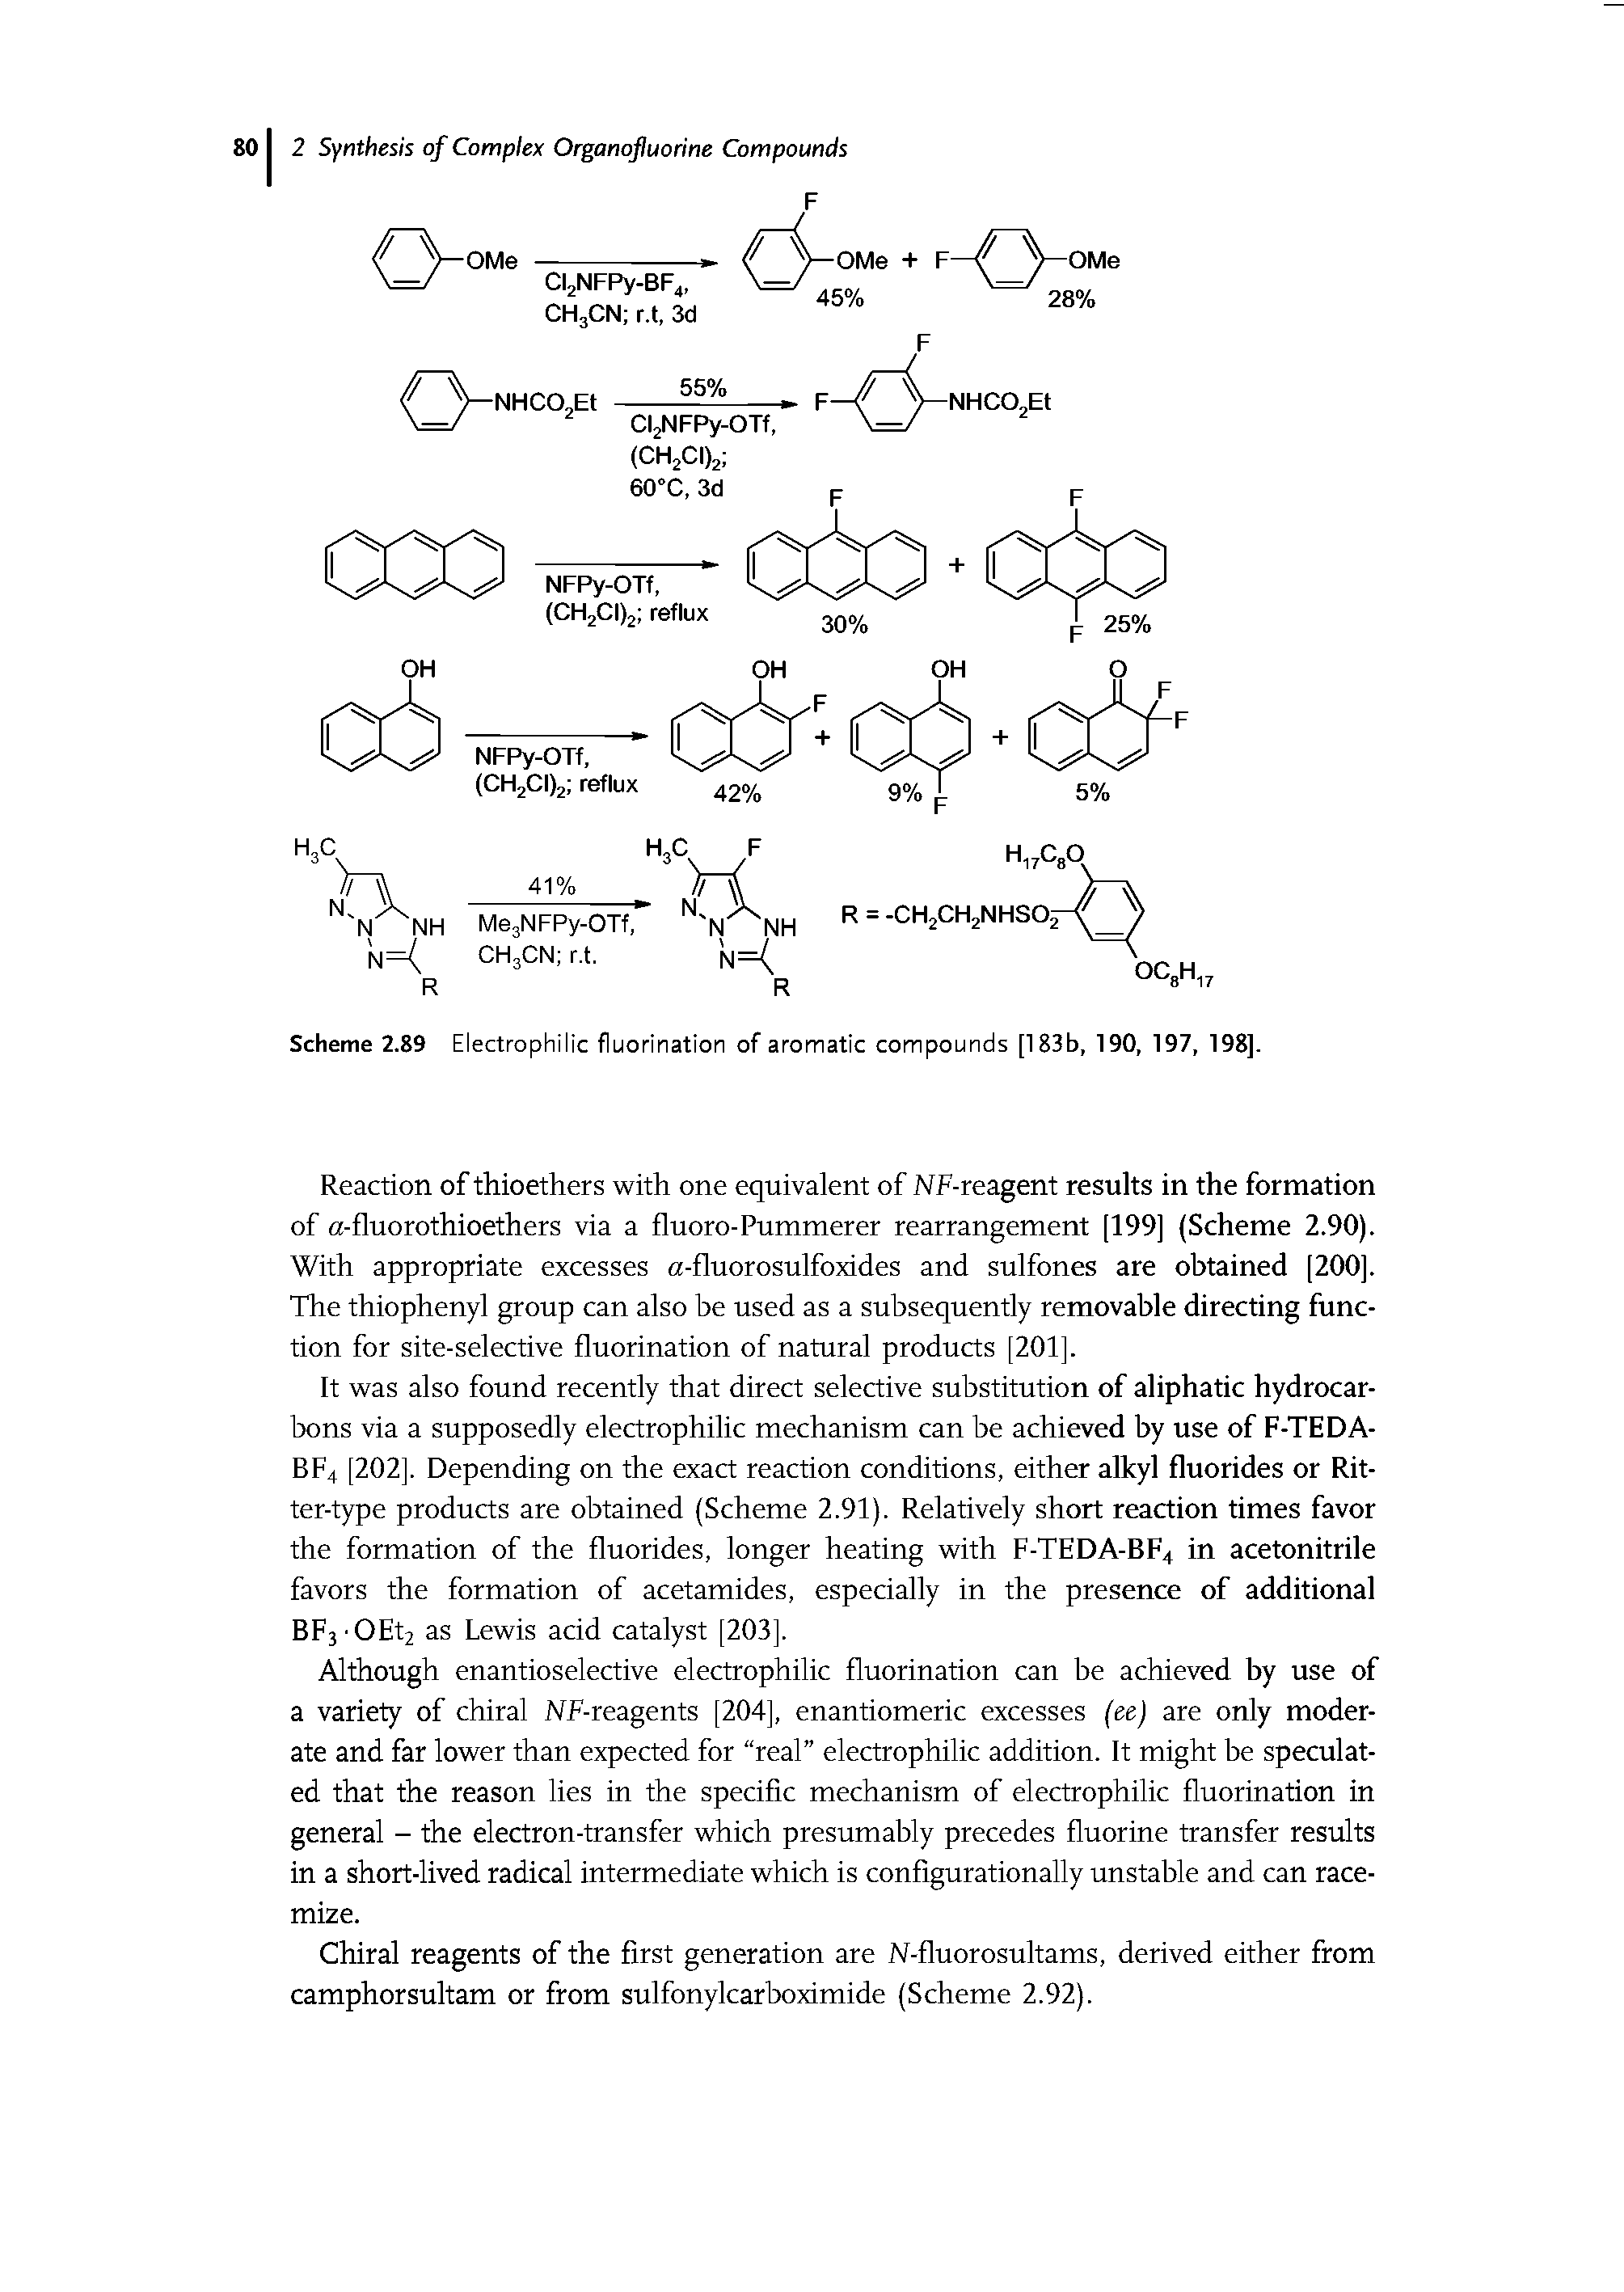 Scheme 2.89 Electrophilic fluorination of aromatic compounds [183b, 190, 197, 198].